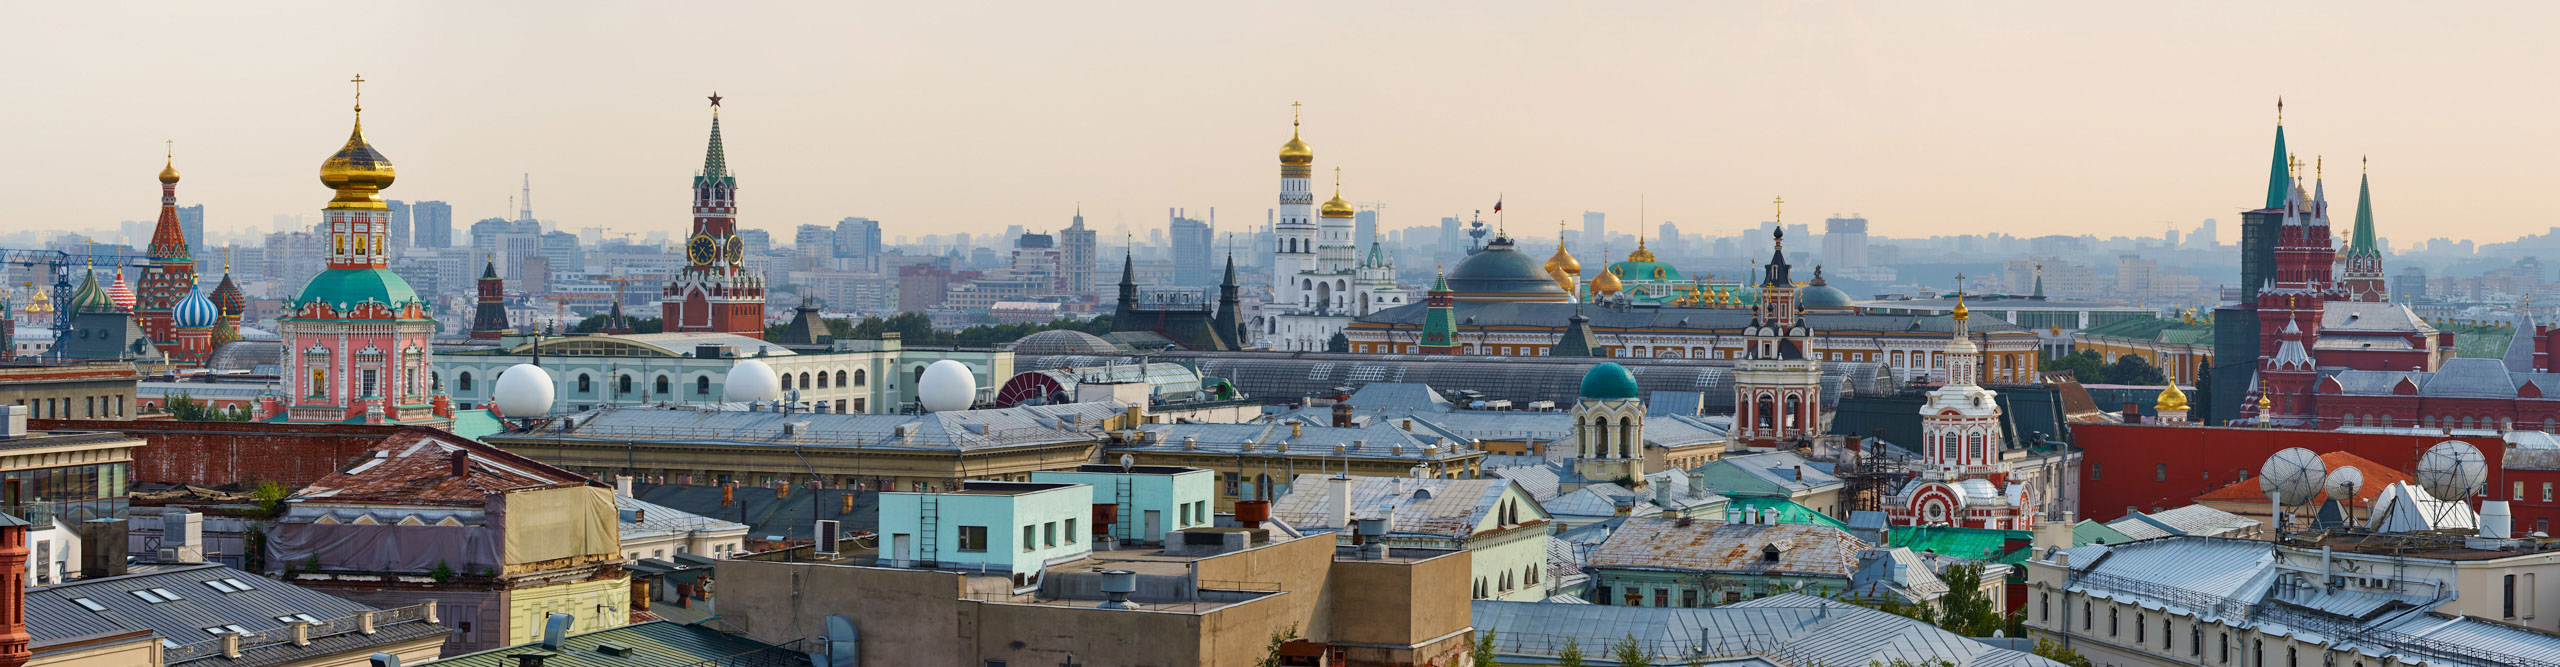 View of rooftops in the center of Moscow overlooking the Kremlin at dusk